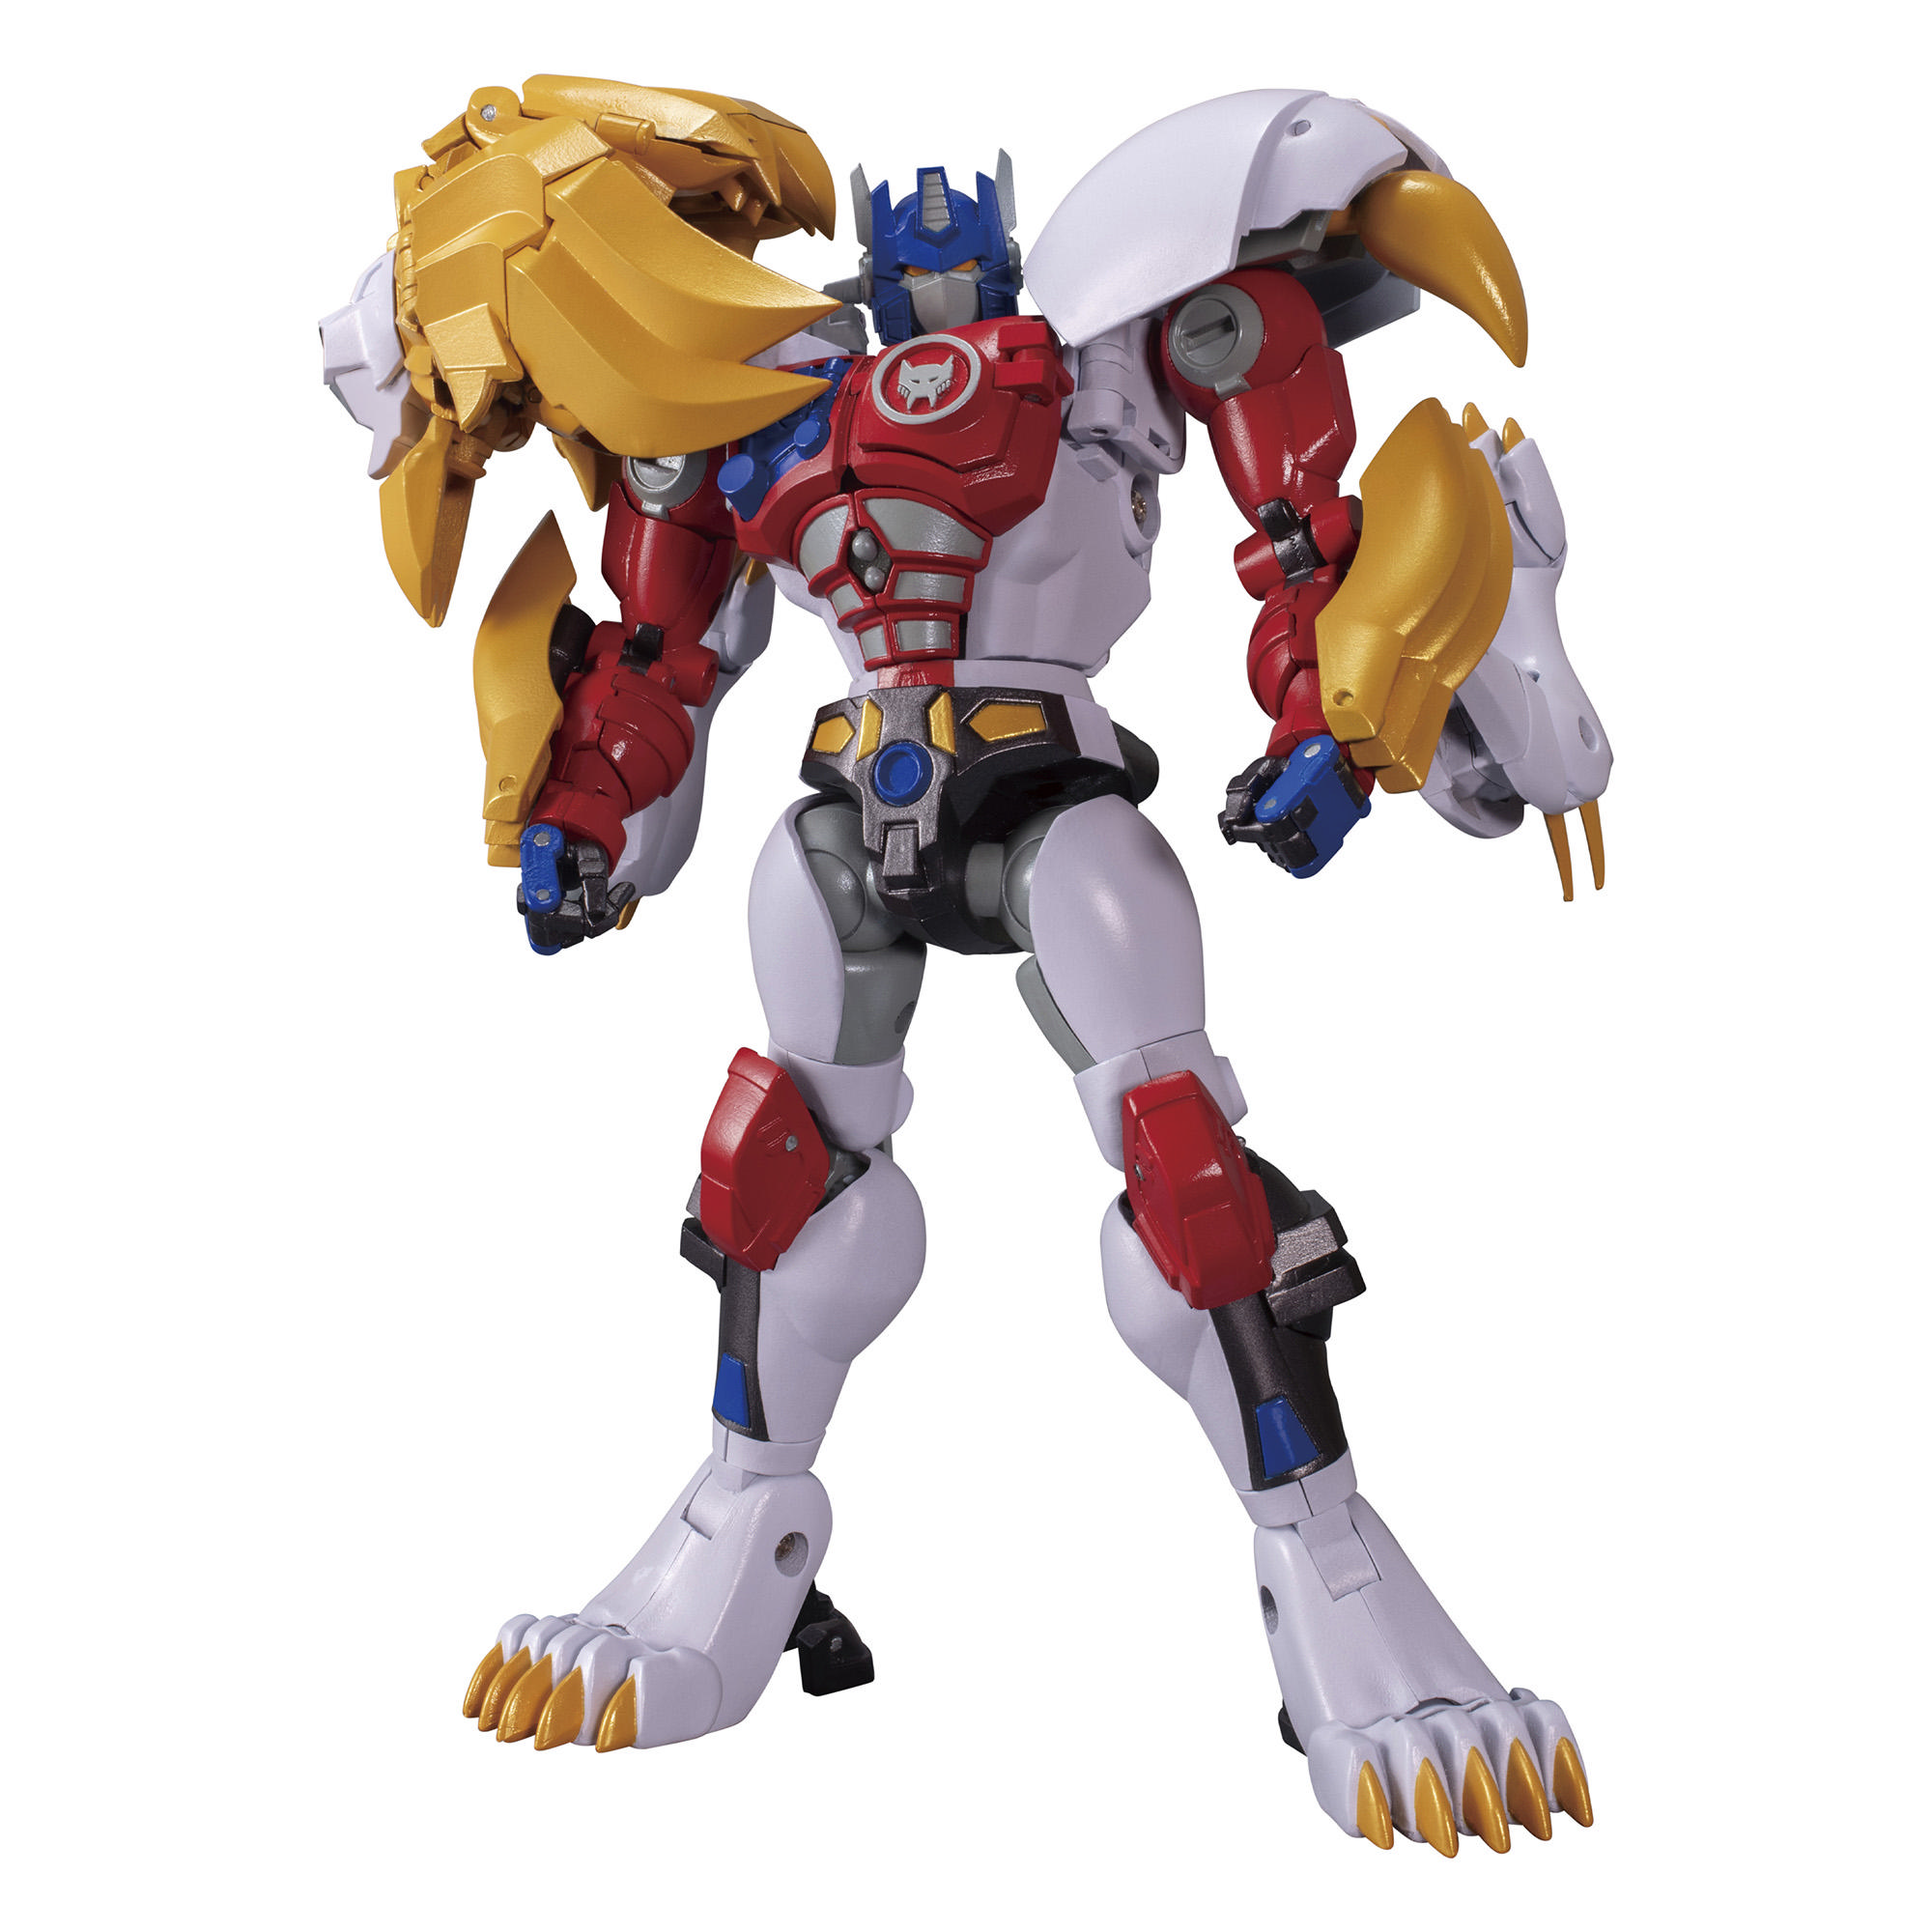 Transformers Masterpiece MP-48 Lio Convoy [Authentic Takara Tomy Product As Sold In Japan] Collector Figure